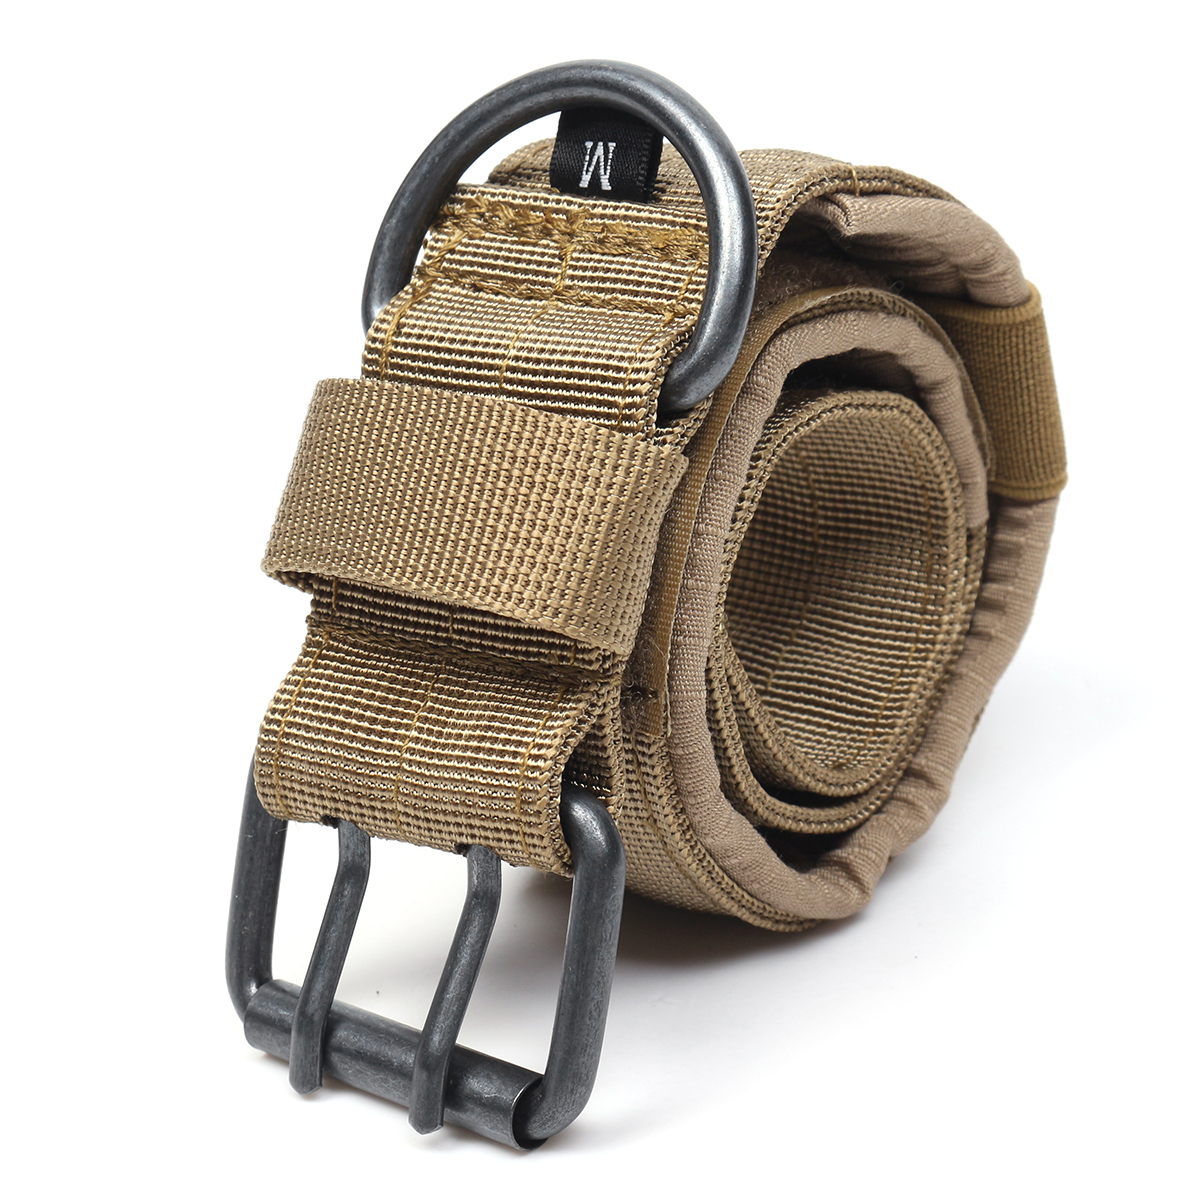 Adjustable-Training-Dog-Collar-Nylon-Tactical-Dog-Collar-Military-With-Metal-D-Ring-Buckle-1366535-7